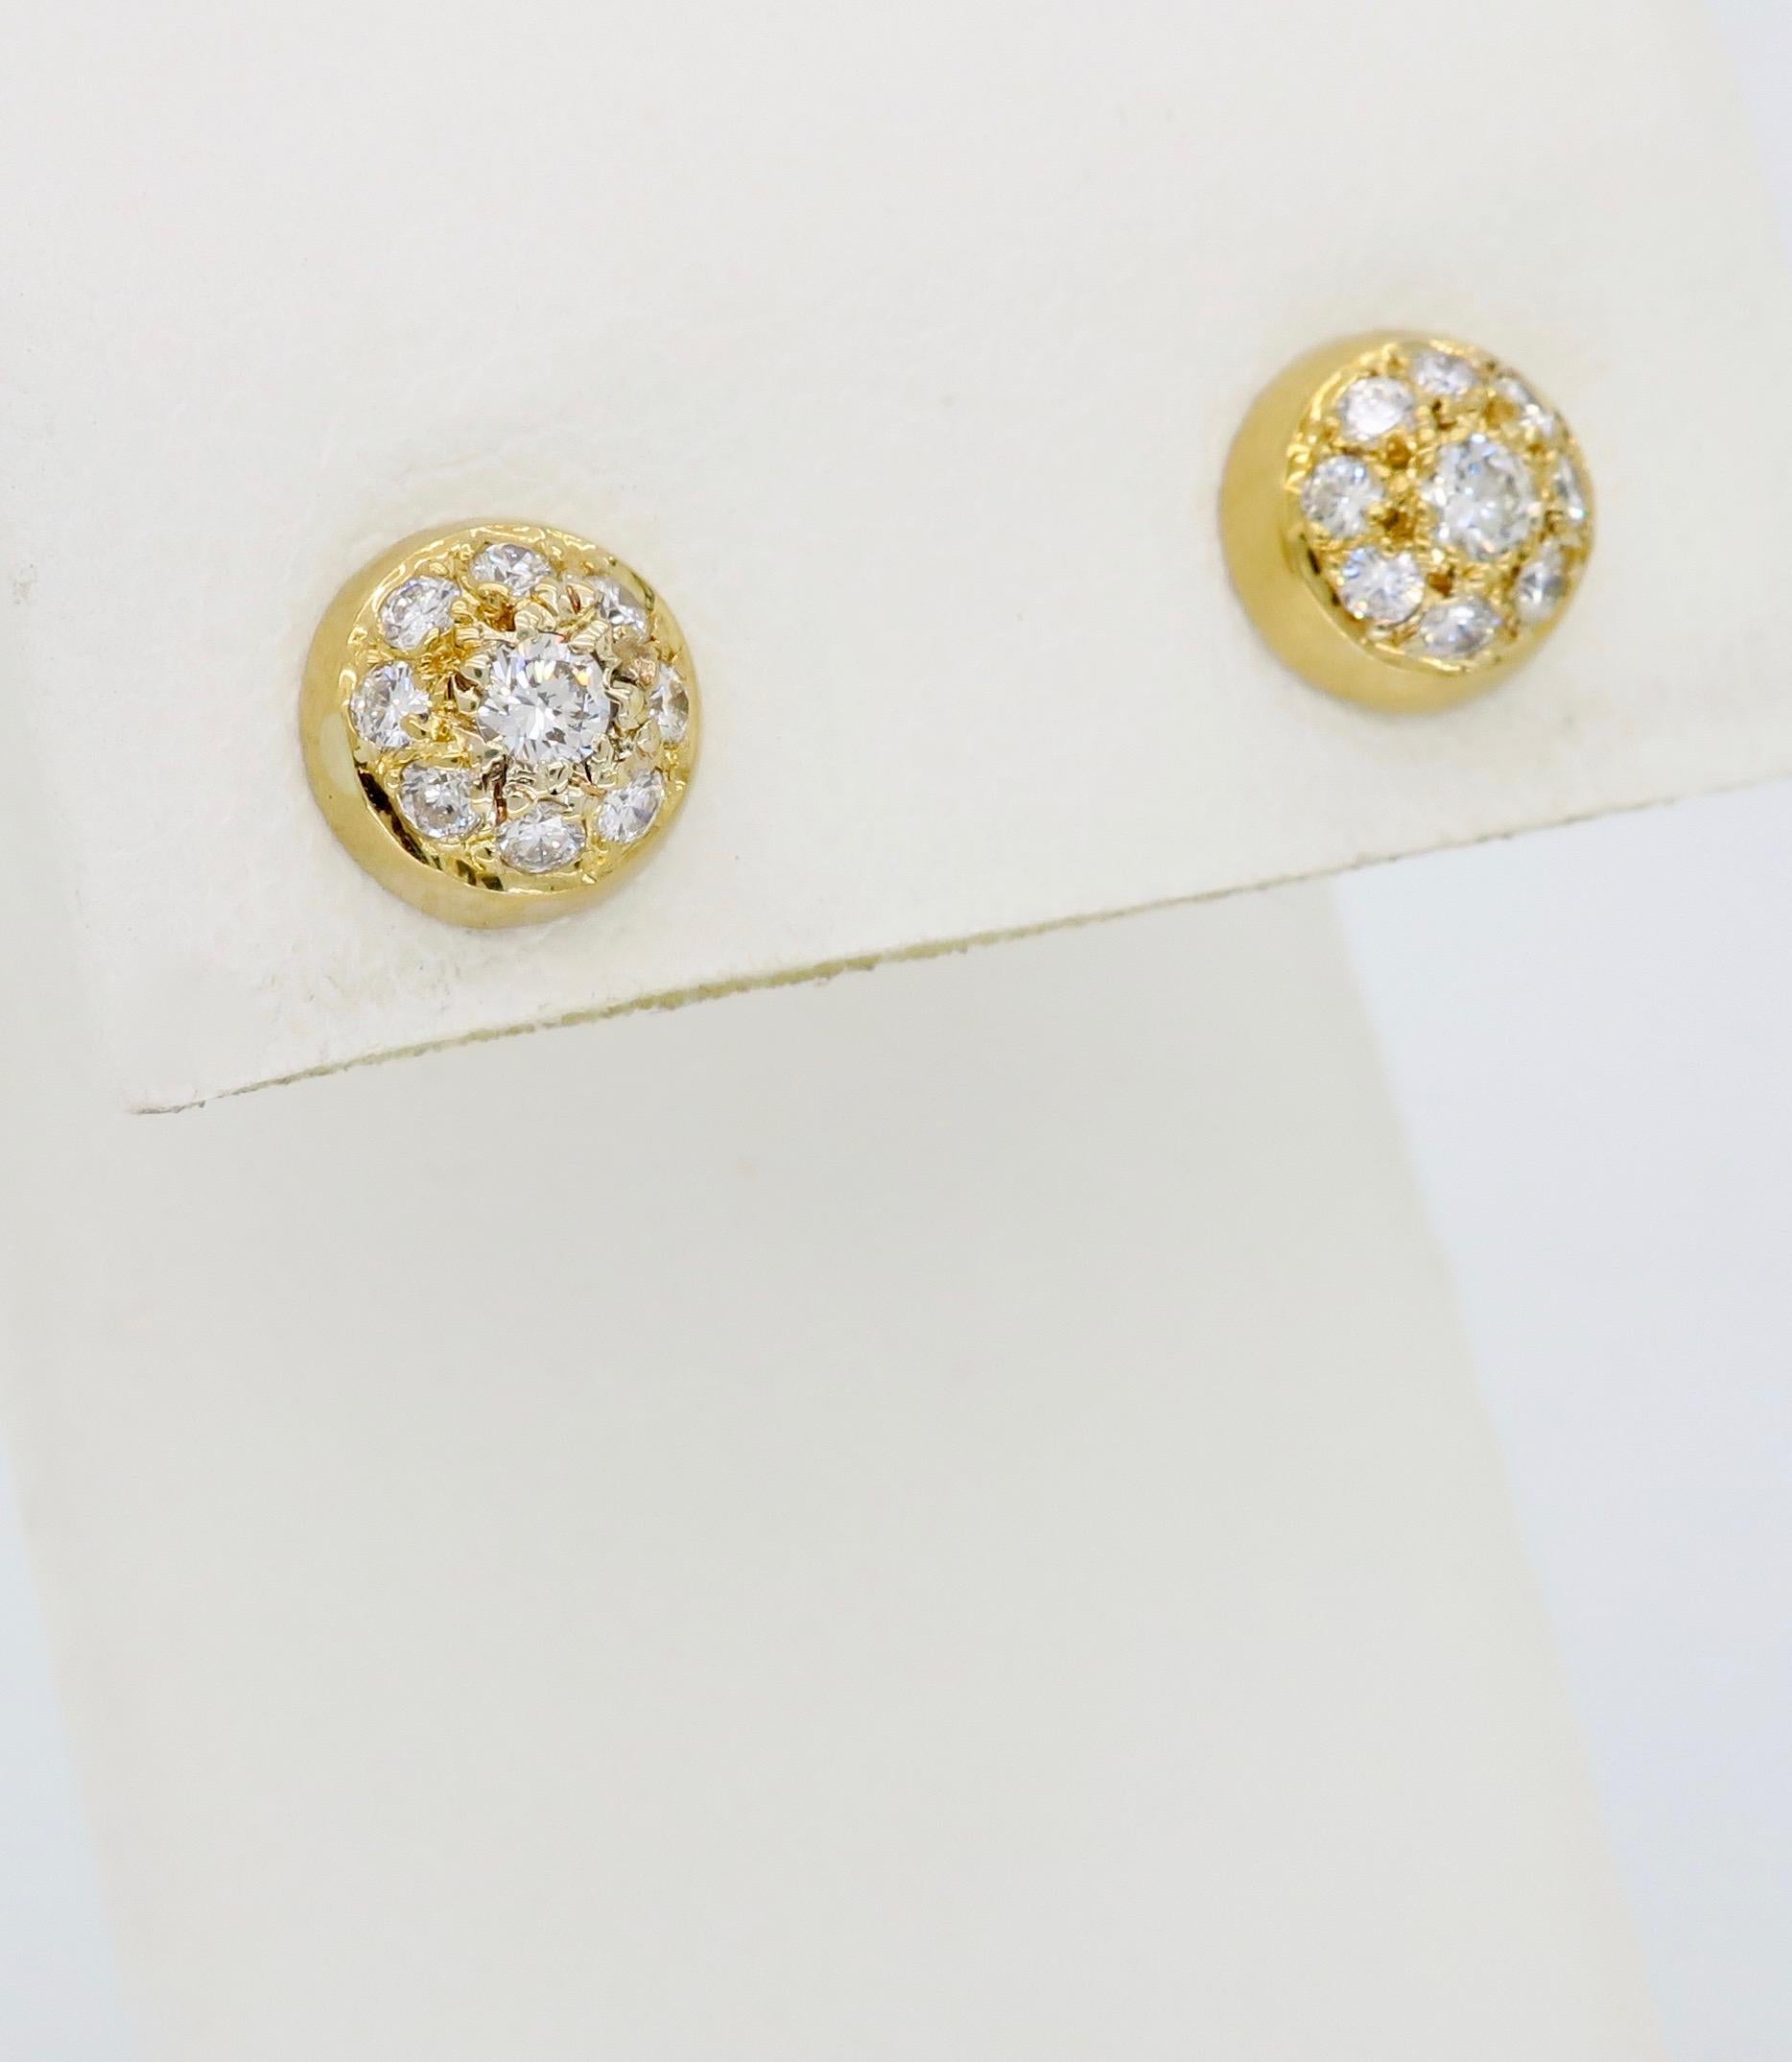 18 Karat Yellow Gold Diamond Cluster Studs Earrings In New Condition For Sale In Webster, NY